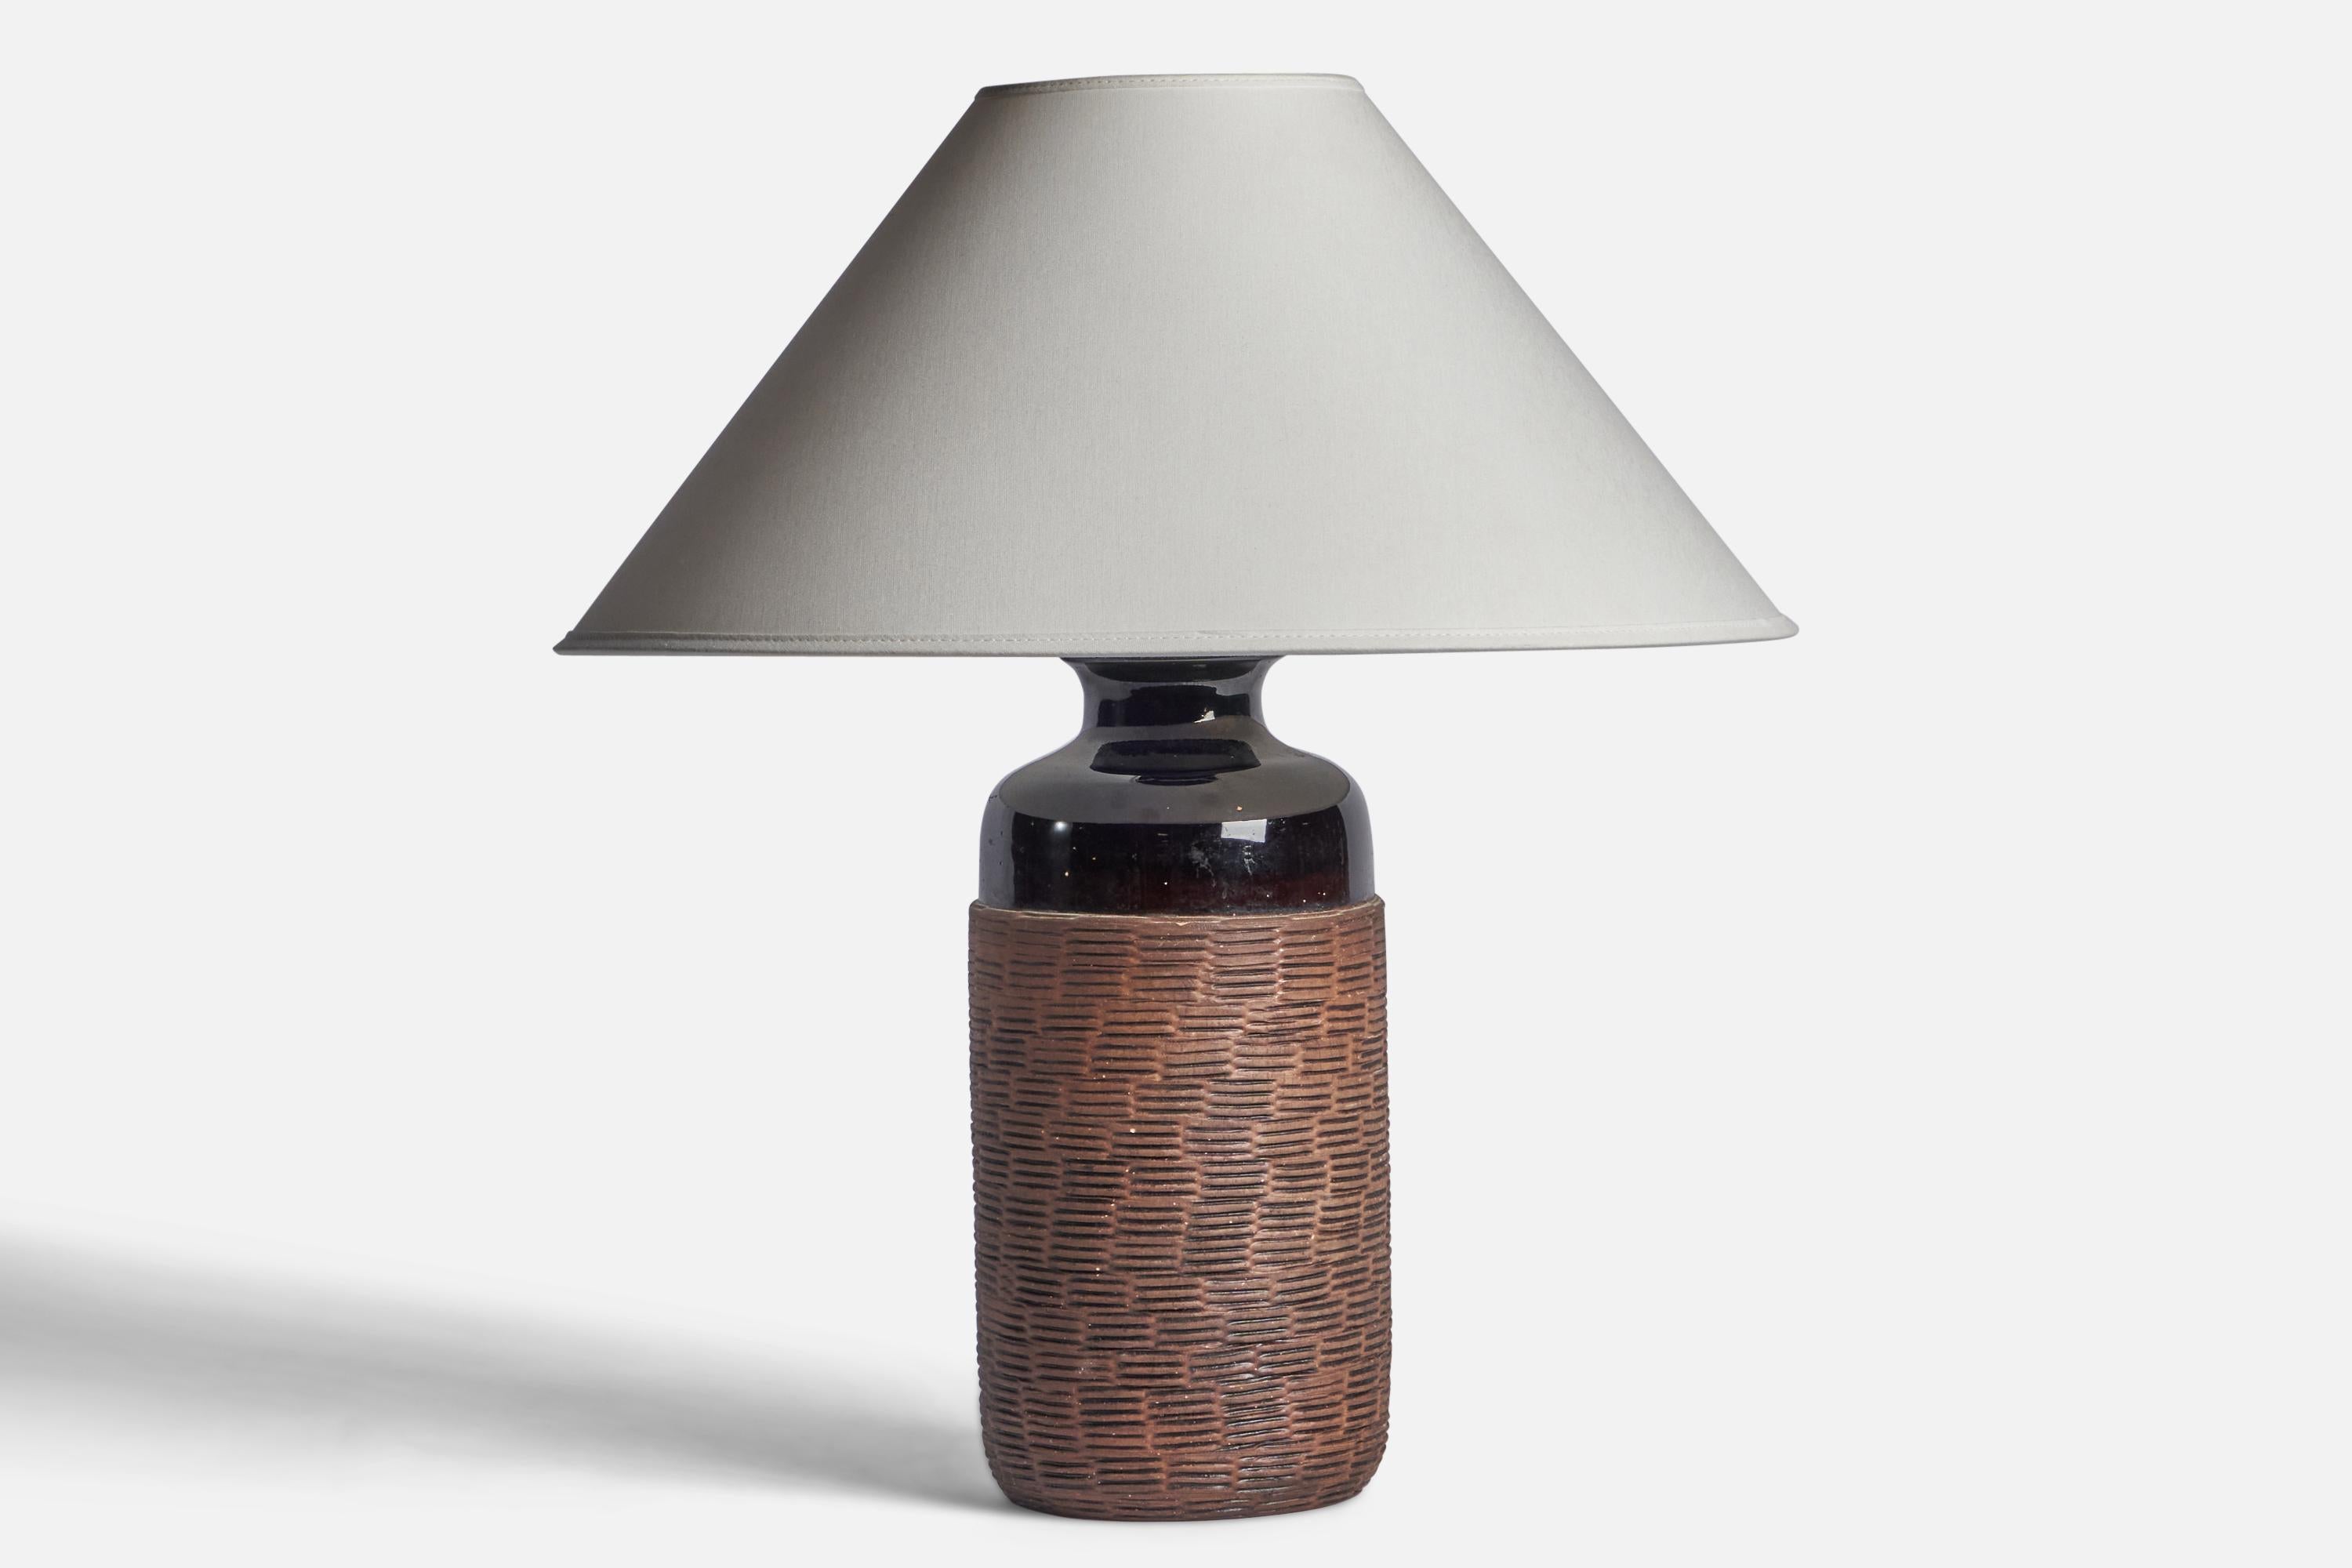 A black and brown-glazed incised stoneware table lamp designed and produced in Sweden, 1960s.

Dimensions of Lamp (inches): 14” H x 5.25” Diameter
Dimensions of Shade (inches): 4.5” Top Diameter x 16” Bottom Diameter x 7.25” H
Dimensions of Lamp